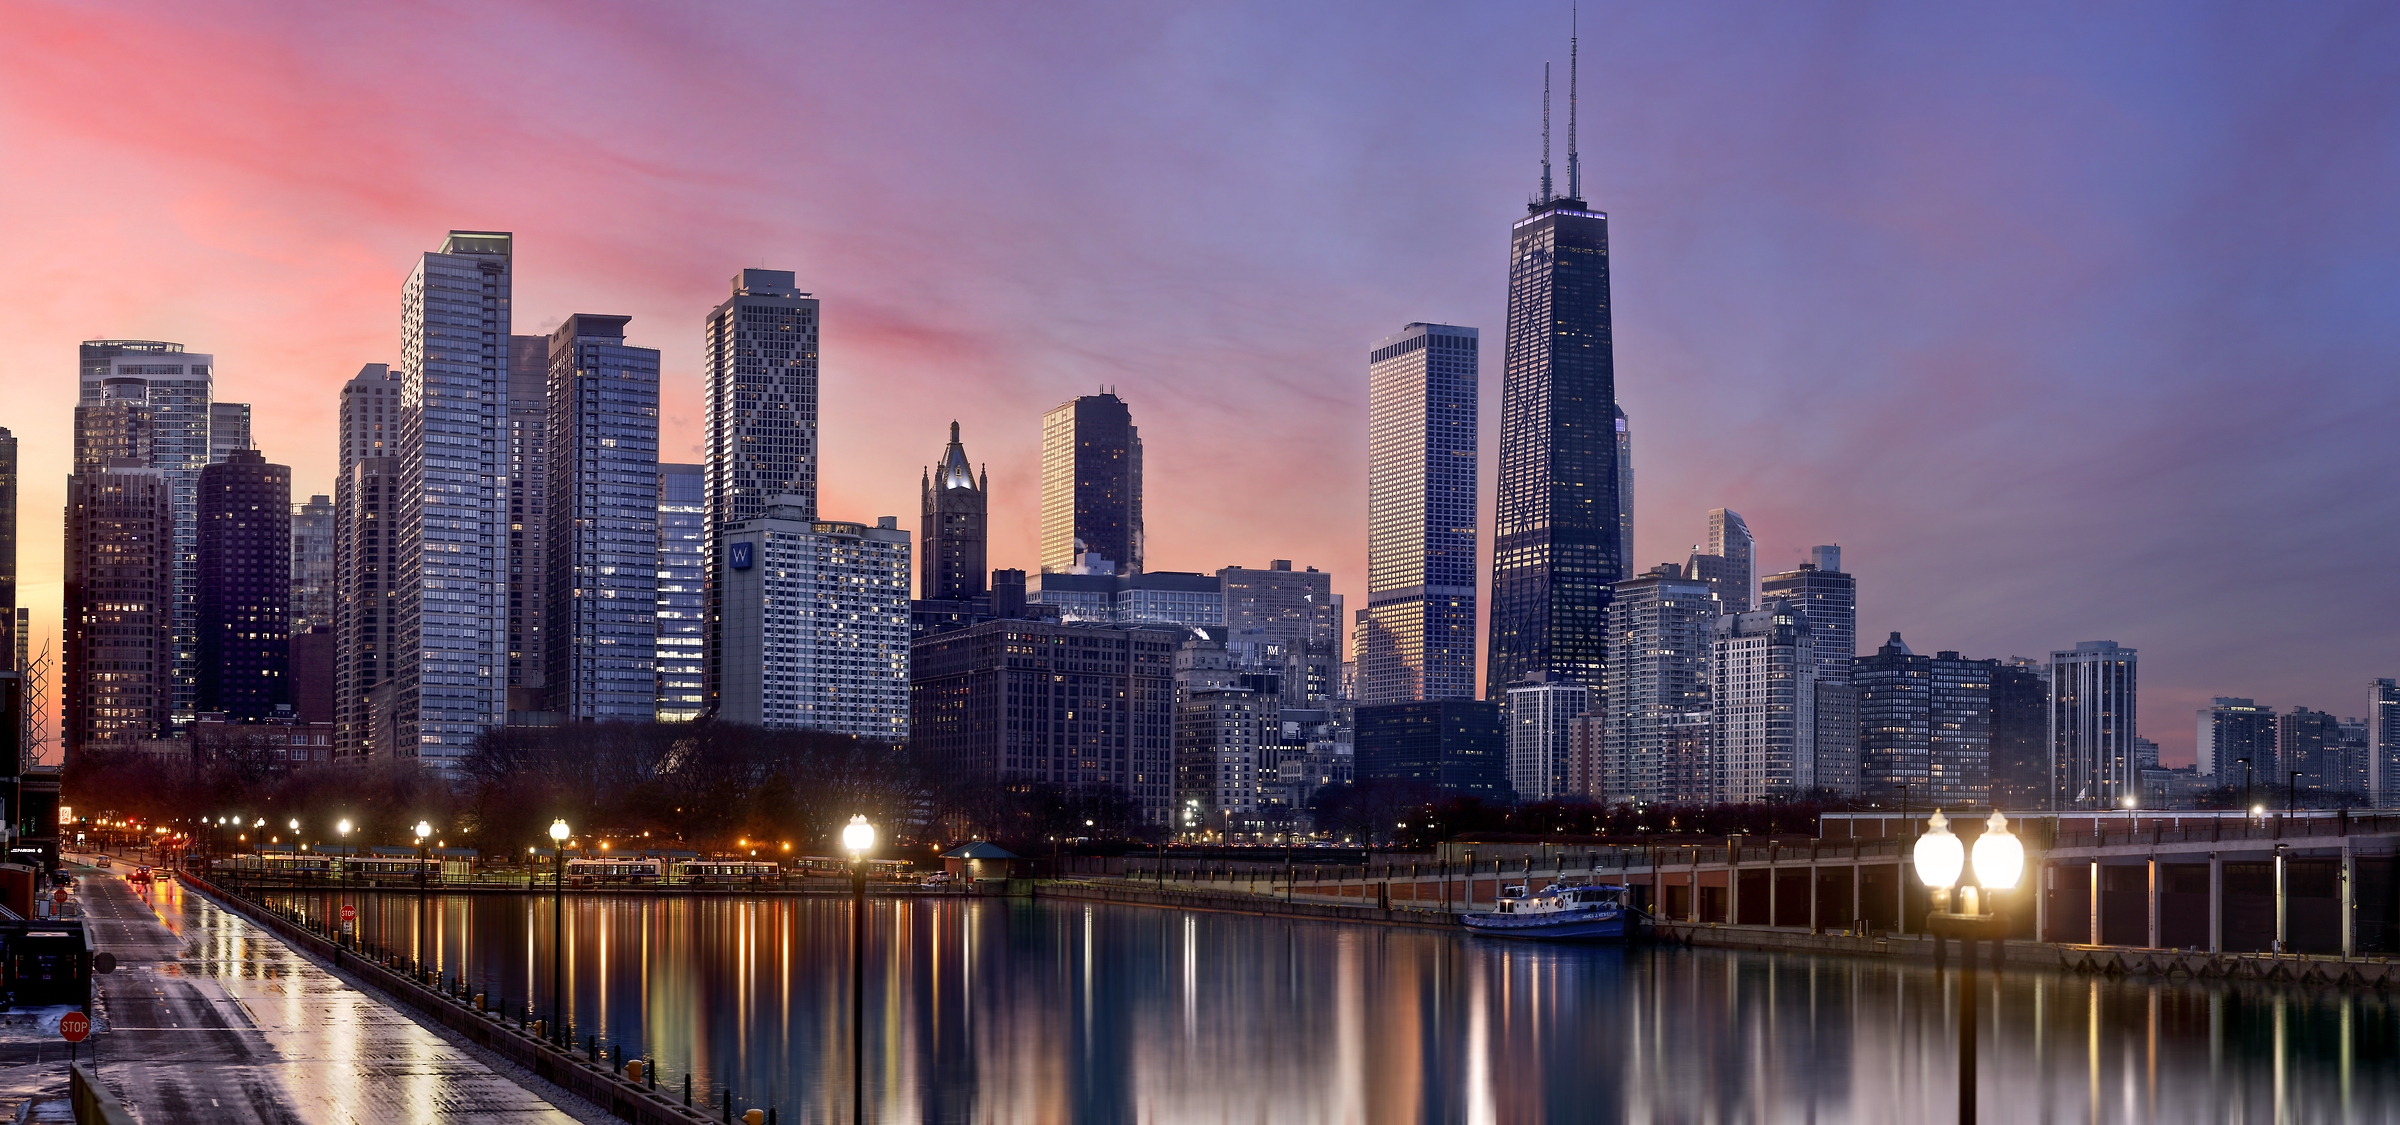 381 megapixels! A very high resolution, large-format VAST photo print of the Chicago skyline at sunset; cityscape photograph created by Phil Crawshay in Chicago, Illinois